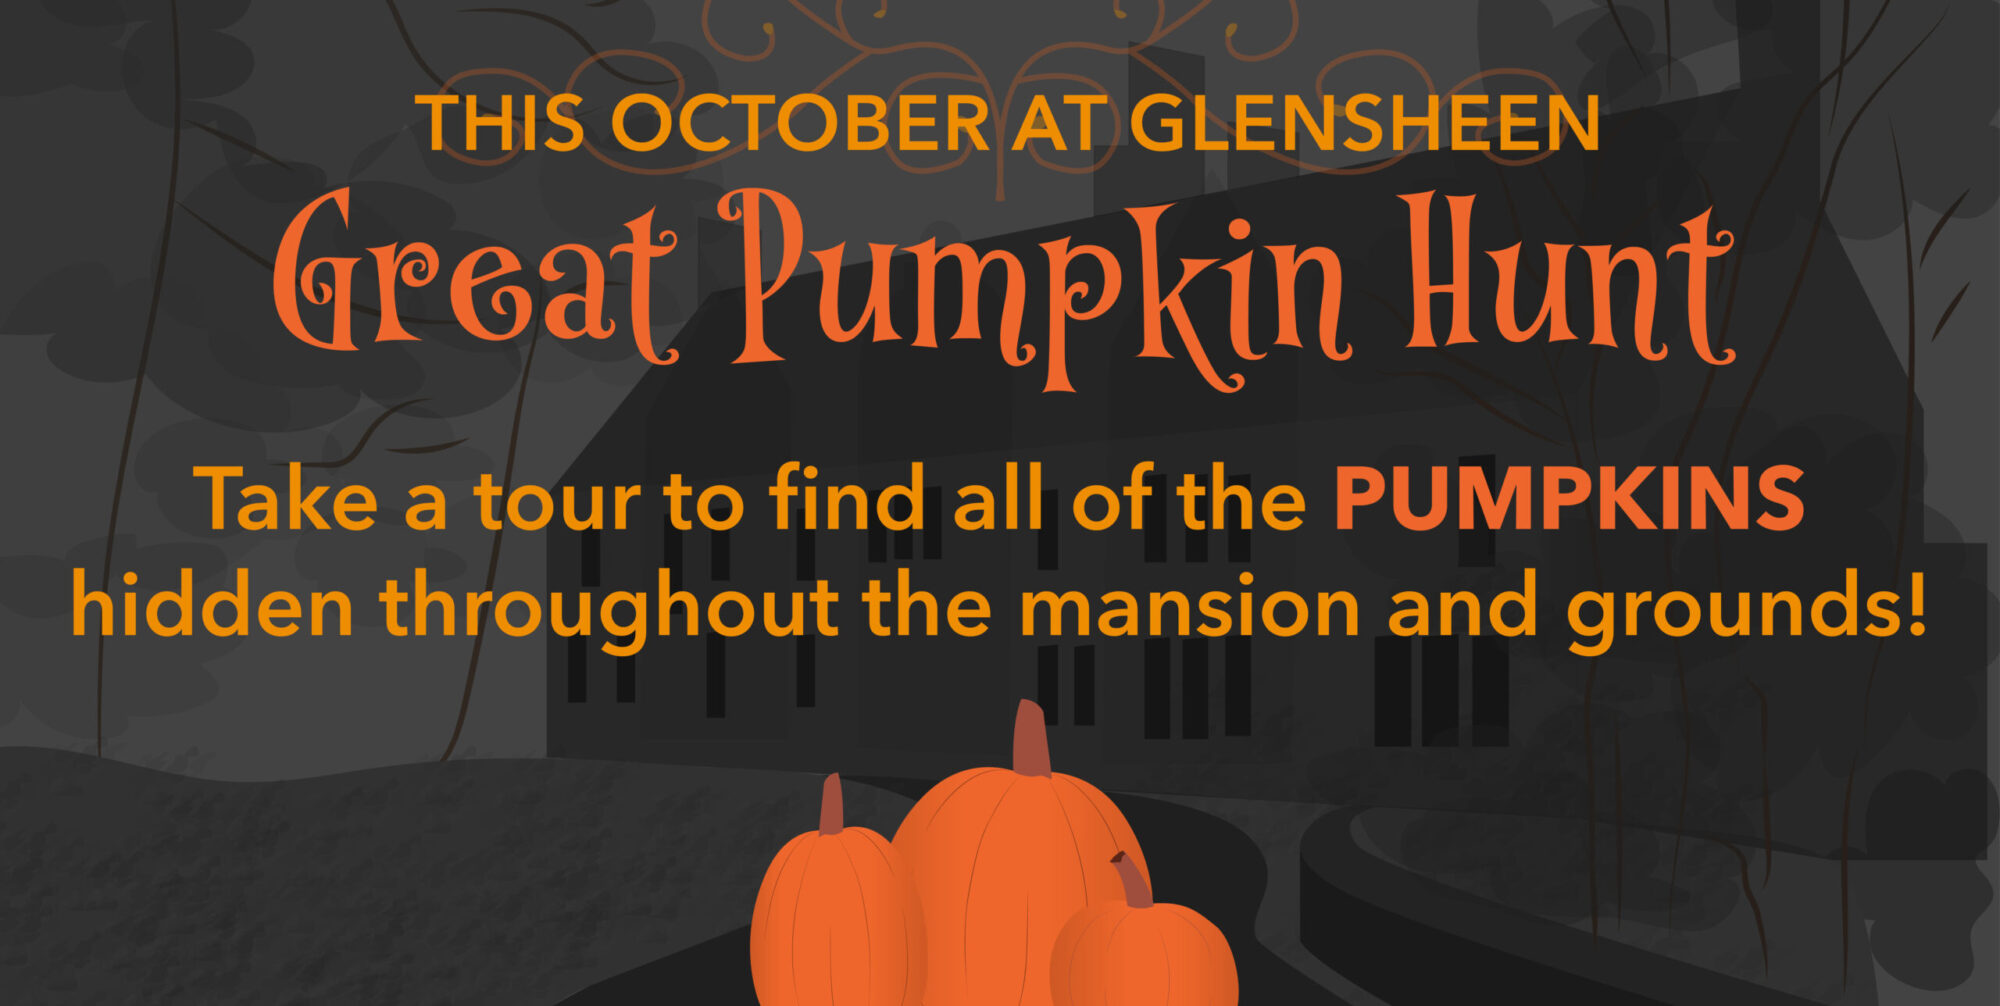 Three orange pumpkins sit in front of a silhouette of a mansion. Text says "This October at Glensheen: Great Pumpkin Hunt. Take a tour to find all of the pumpkins hidden throughout the mansion and grounds.